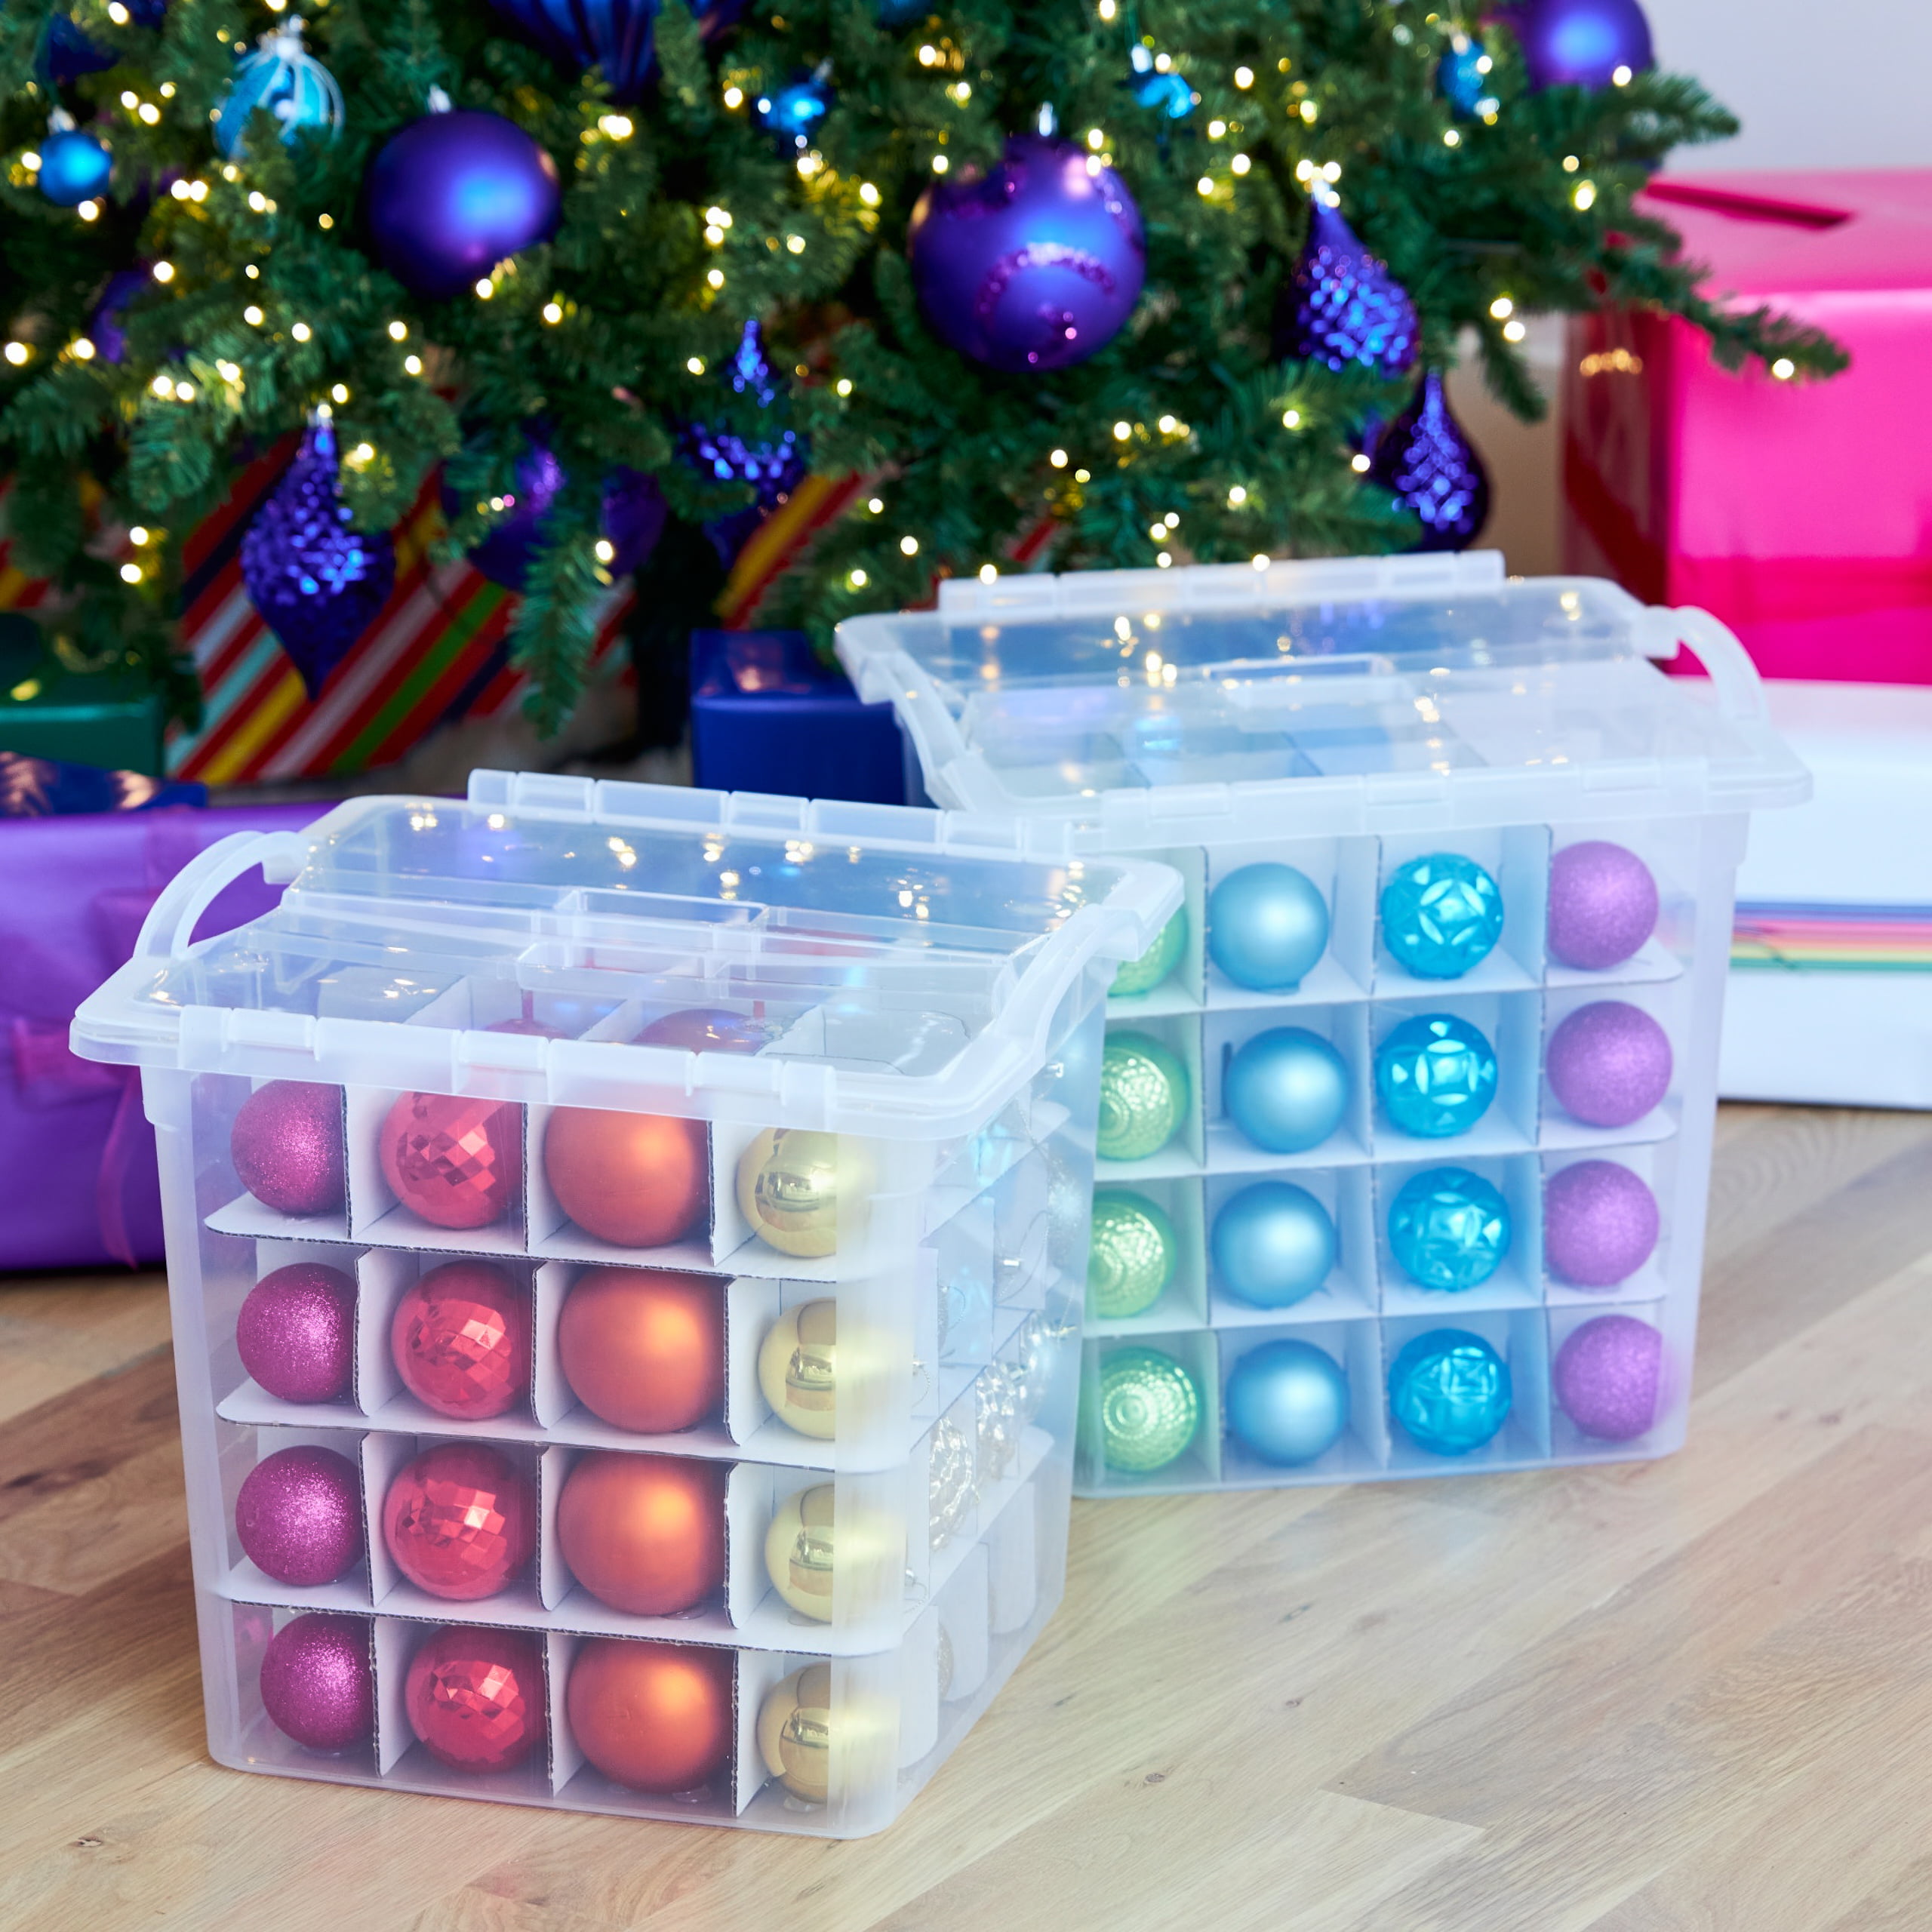  CHENGWEI Christmas Ornament Storage Box with Dividers